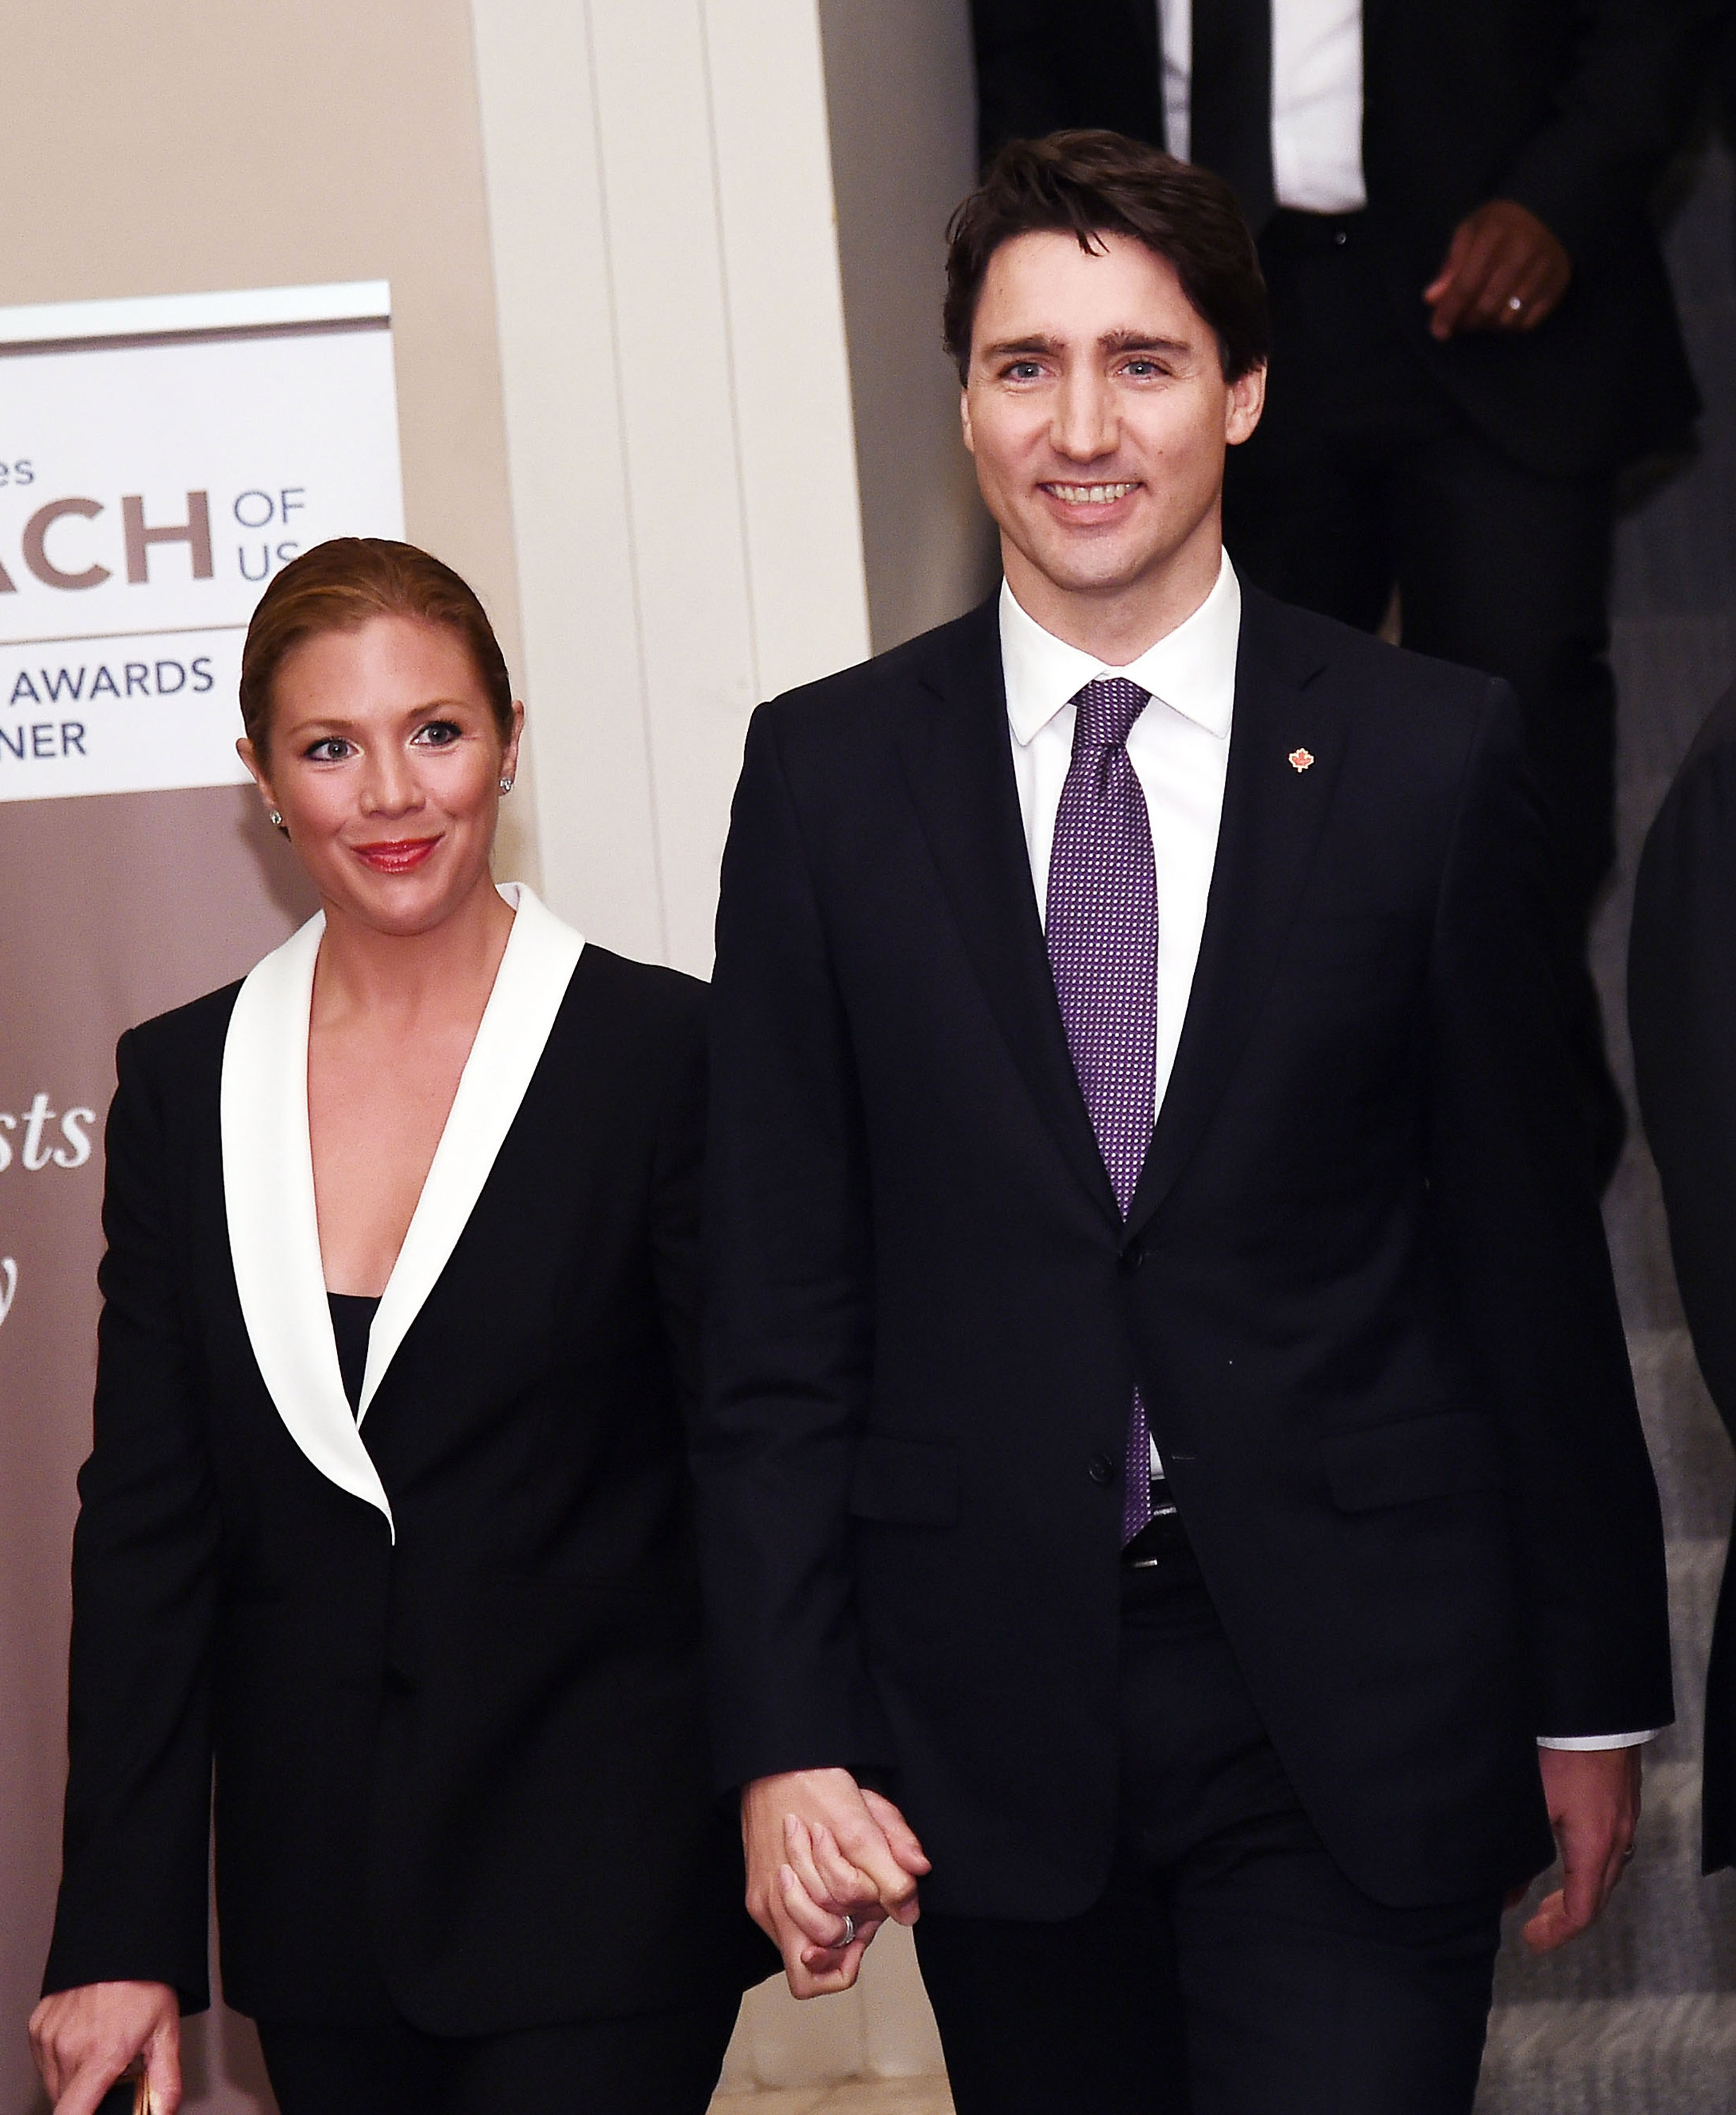 Canadian Prime Minister Justin Trudeau (R) and his wife Sophie Gregoire-Trudeau attend the Catalyst Awards Dinner in March (Ilya S. Savenok—Getty Images)